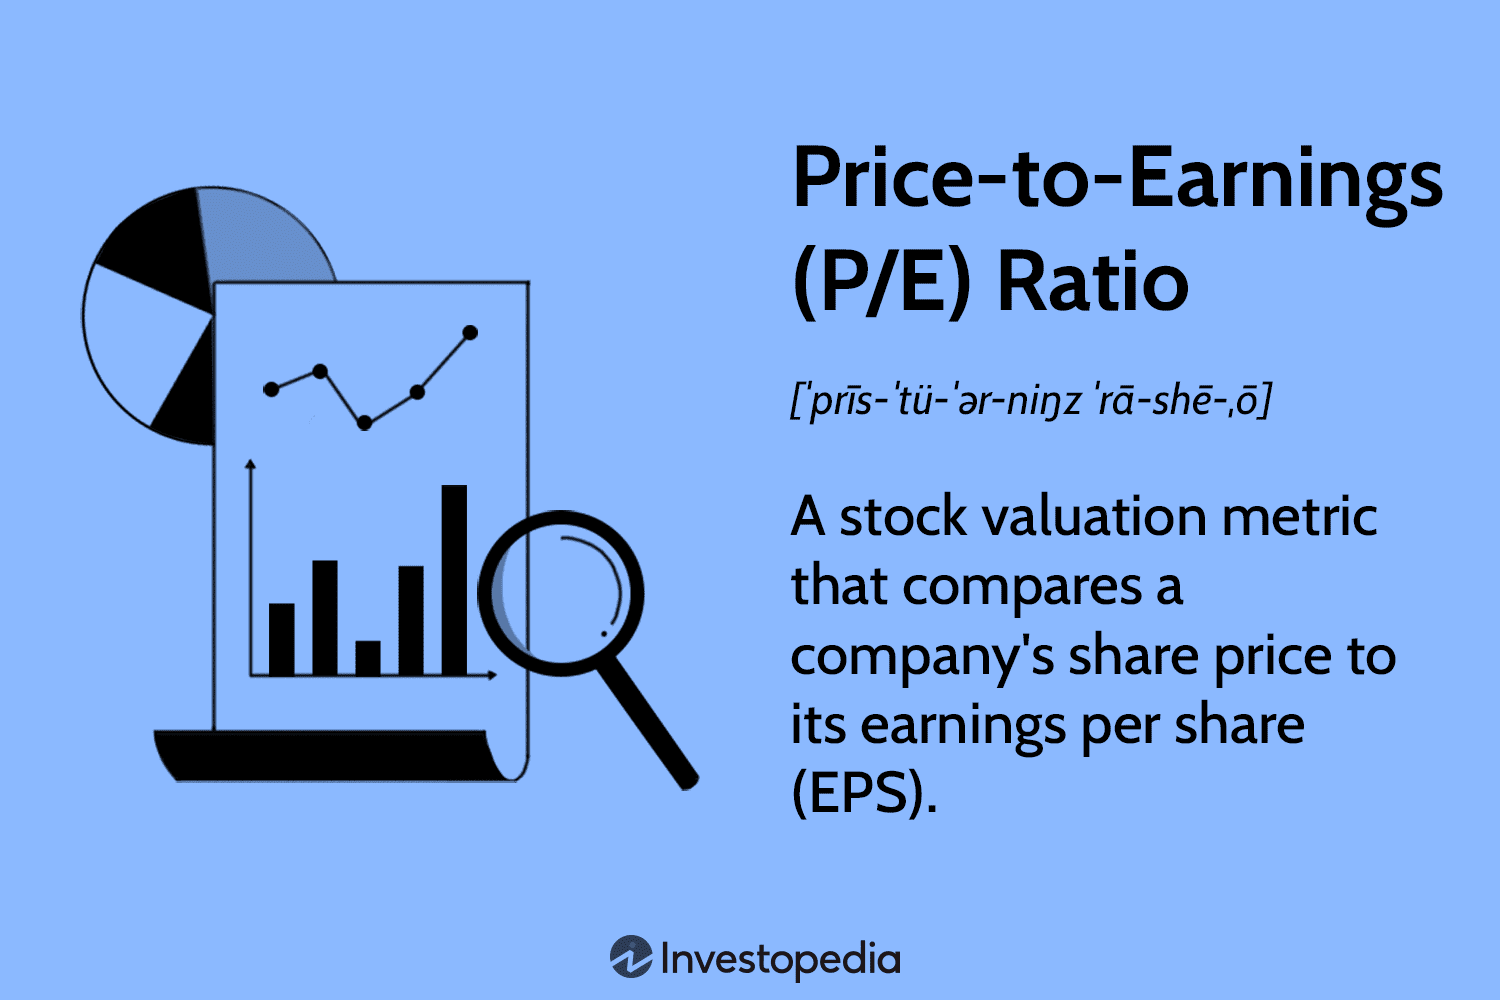  Price-to-Earnings (P/E) Ratio